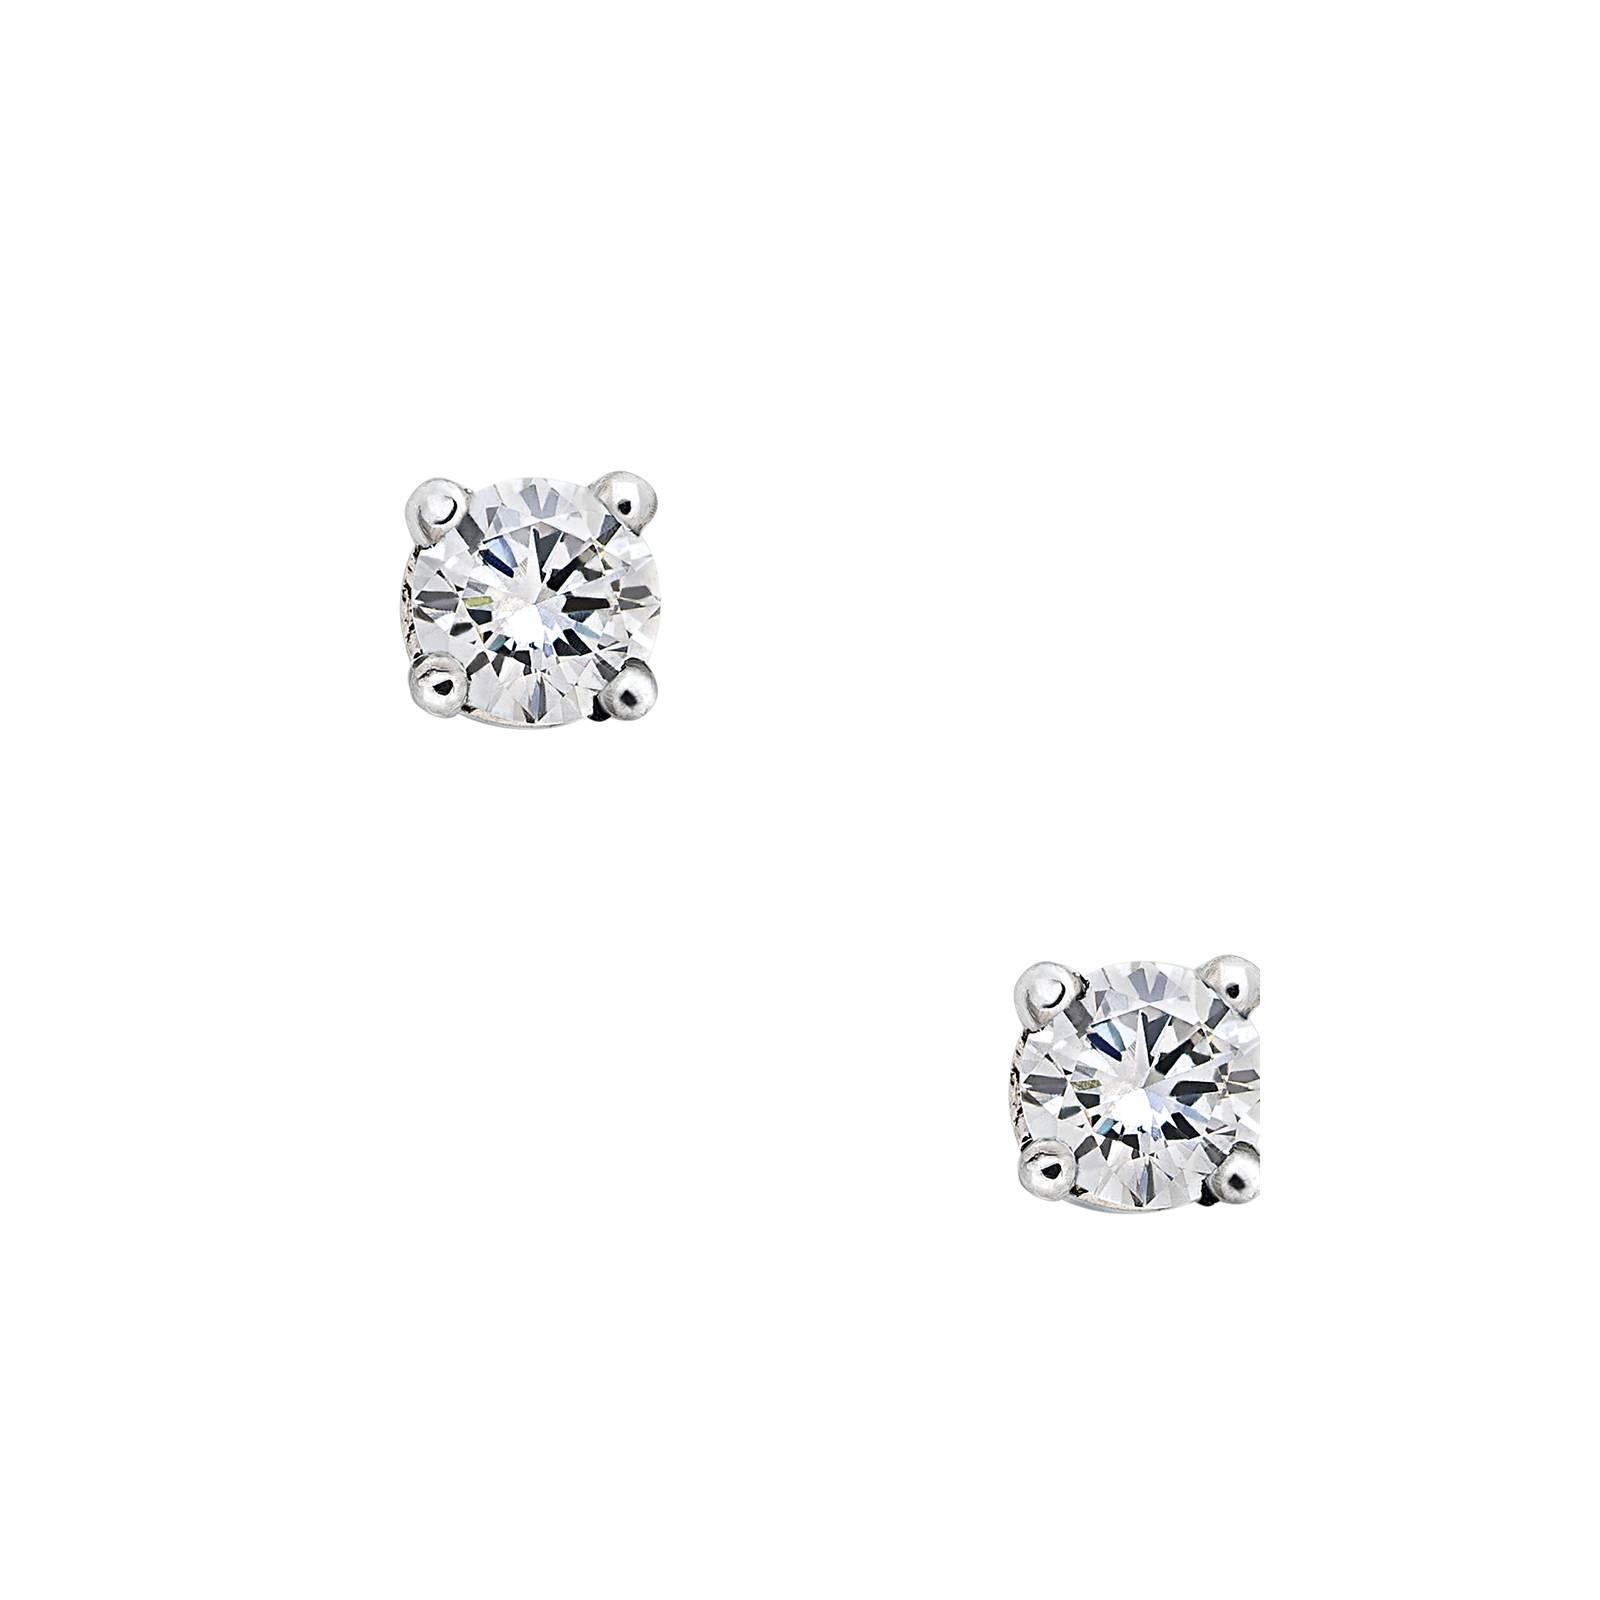 A timeless favourite, the Brilliant Diamond Studs feature a pair of sparkling 0.20 tct natural white diamonds set in an 18k white gold backing. Each diamond is set in a signature House of Eléonore « fleur » setting.
